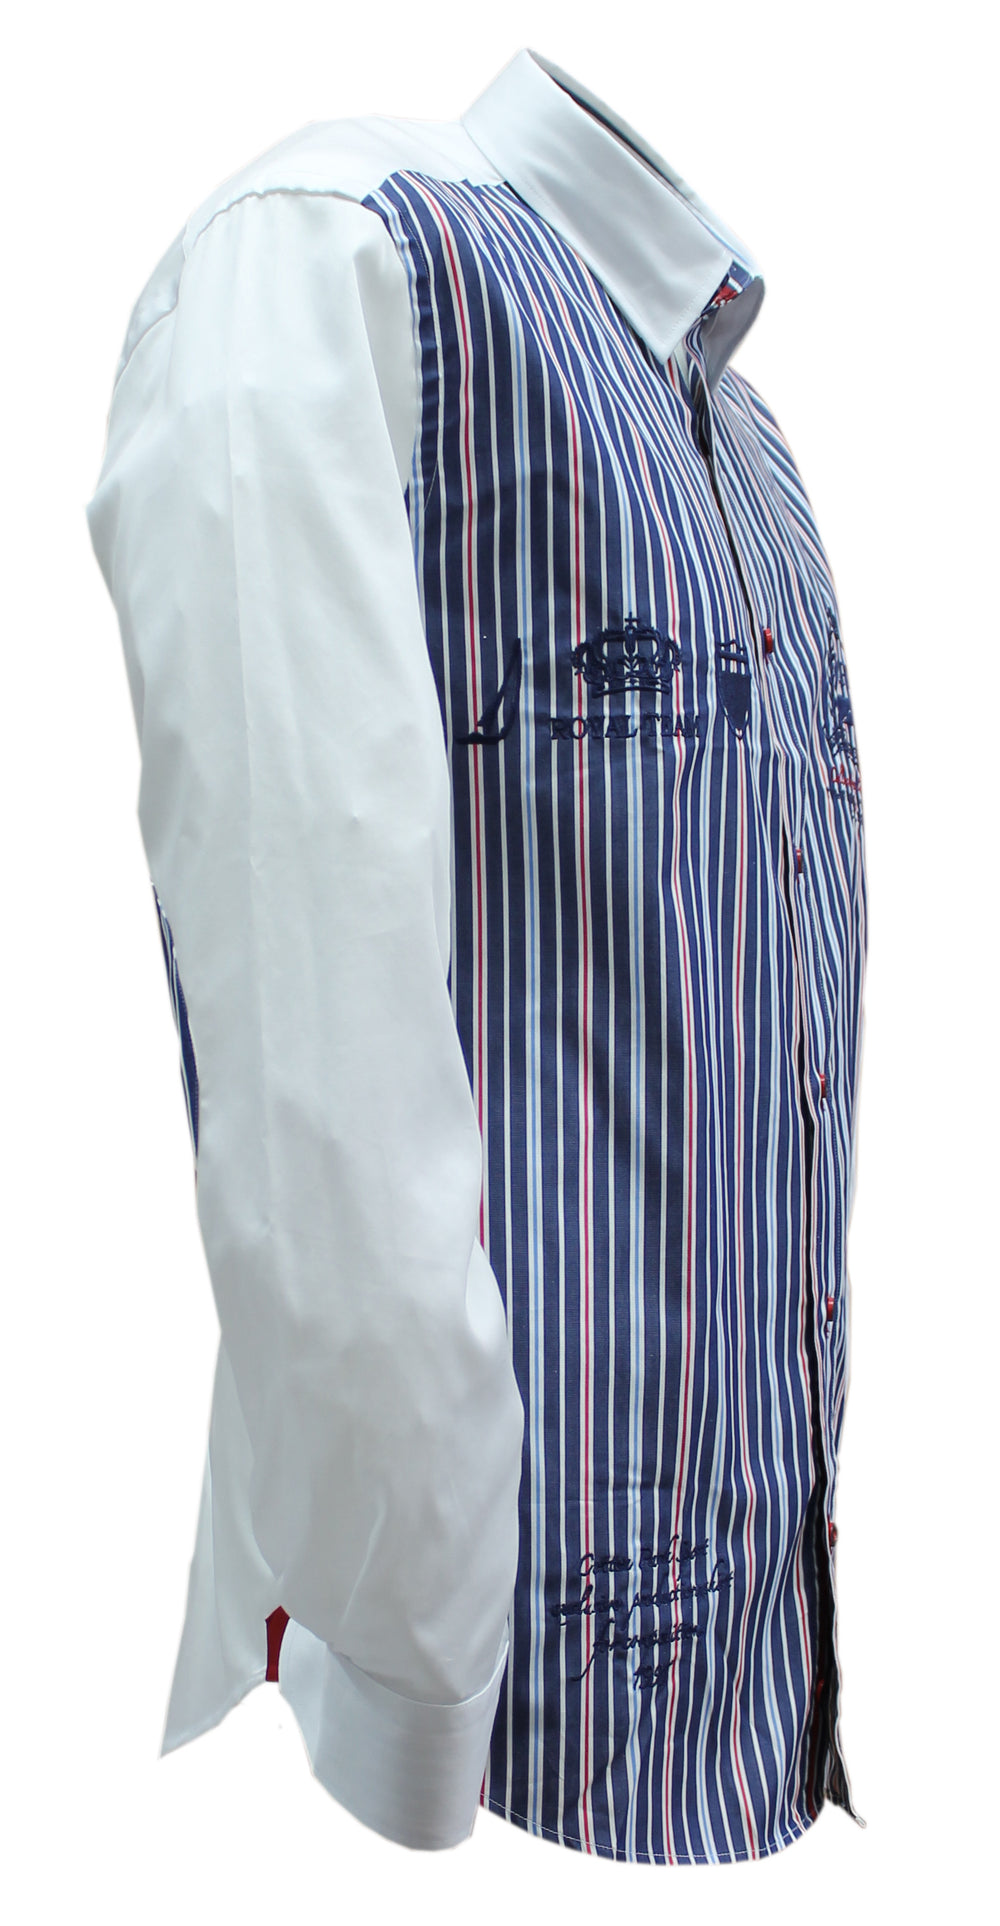 Sporty chic shirt with red and sky blue embroidered stripes